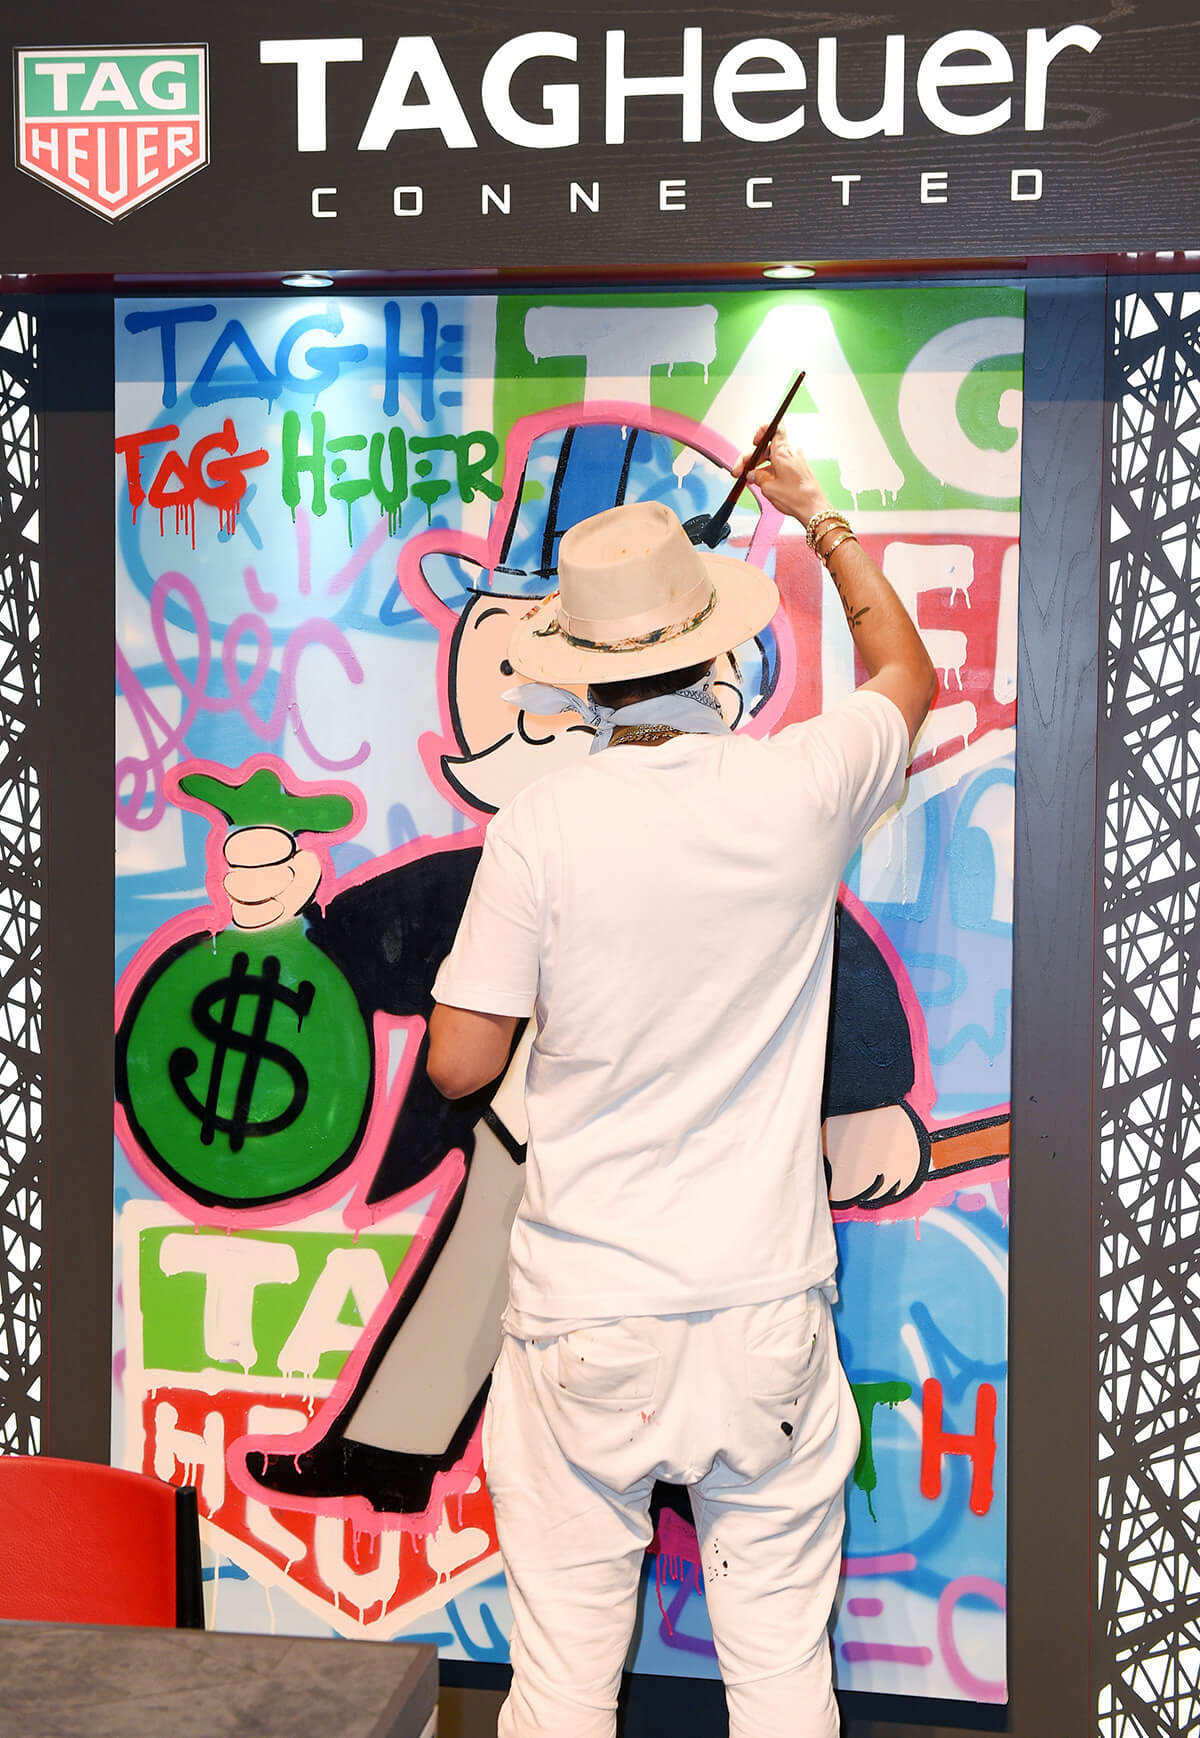 Street artist Alec Monopoly painting TAG Heuer onto wall